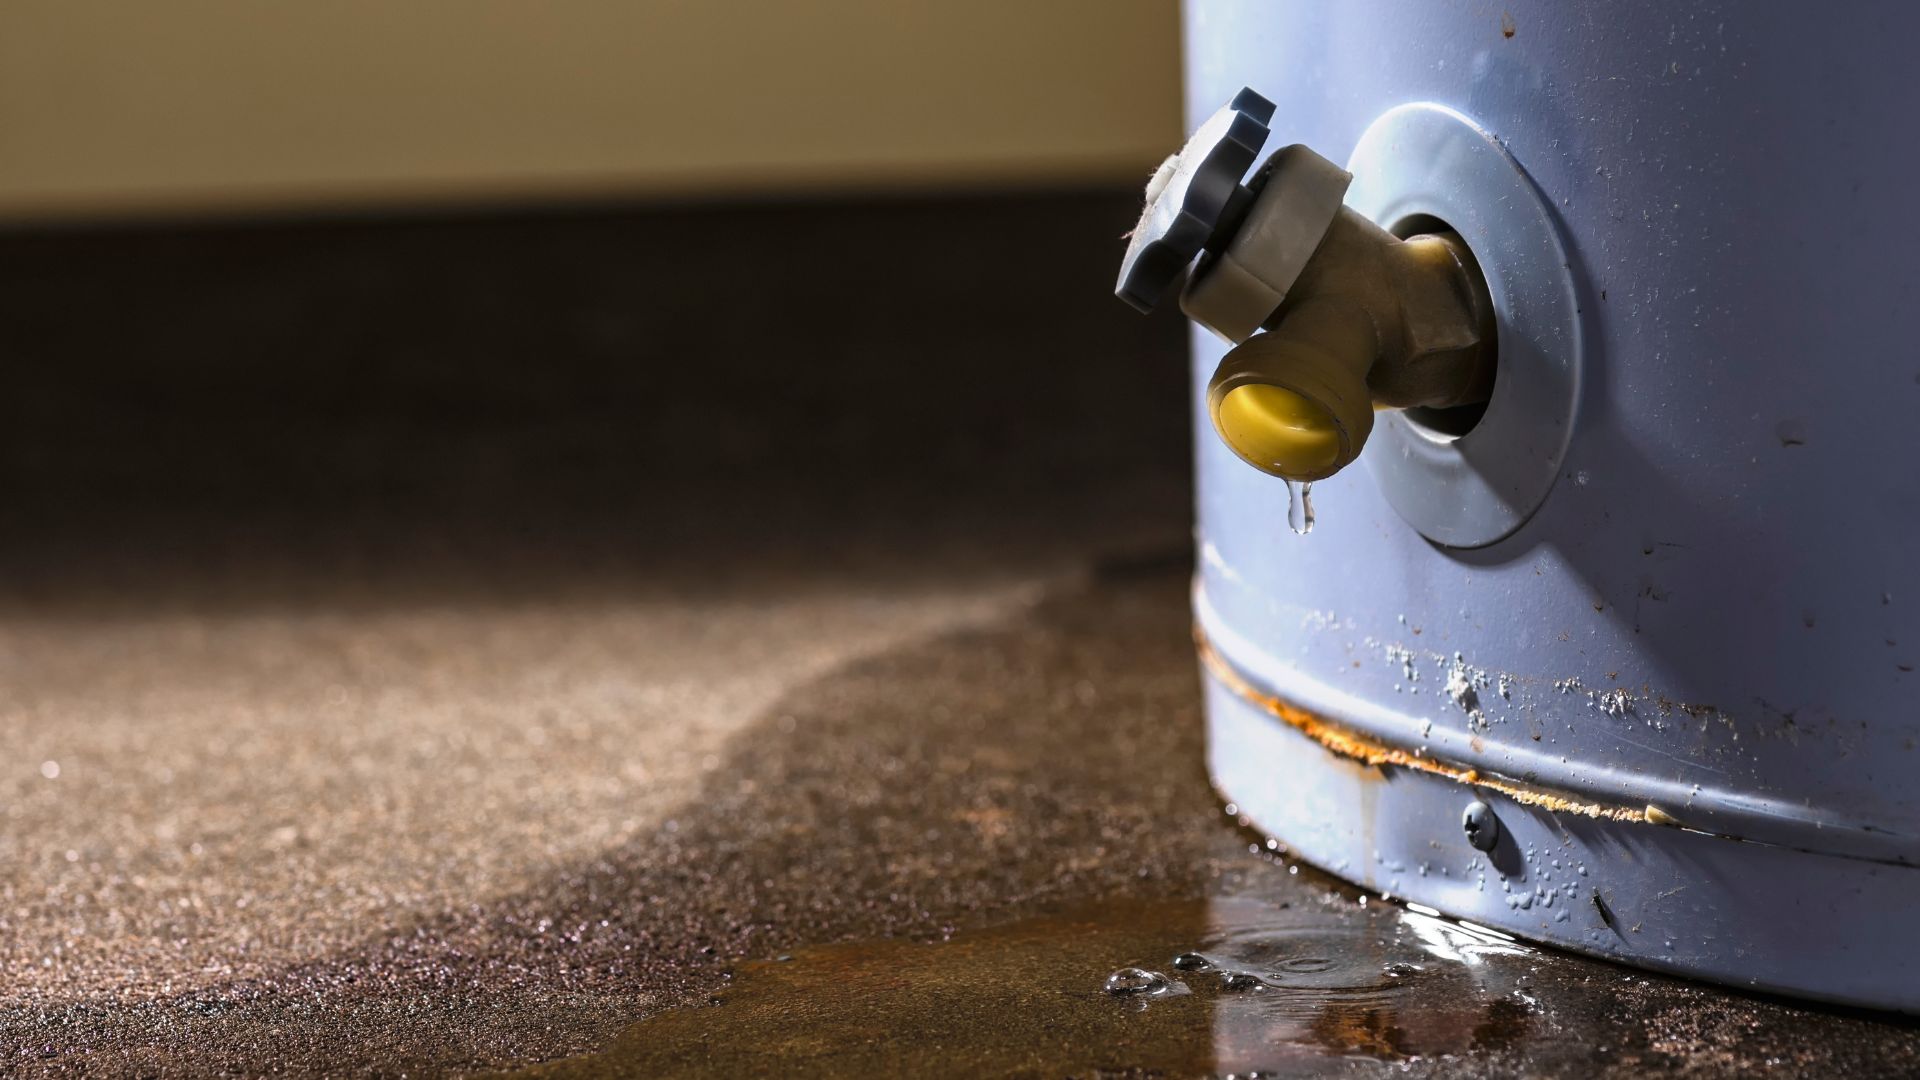 Should I Repair or Replace My Water Heater? 4 Key Factors to Keep in Mind